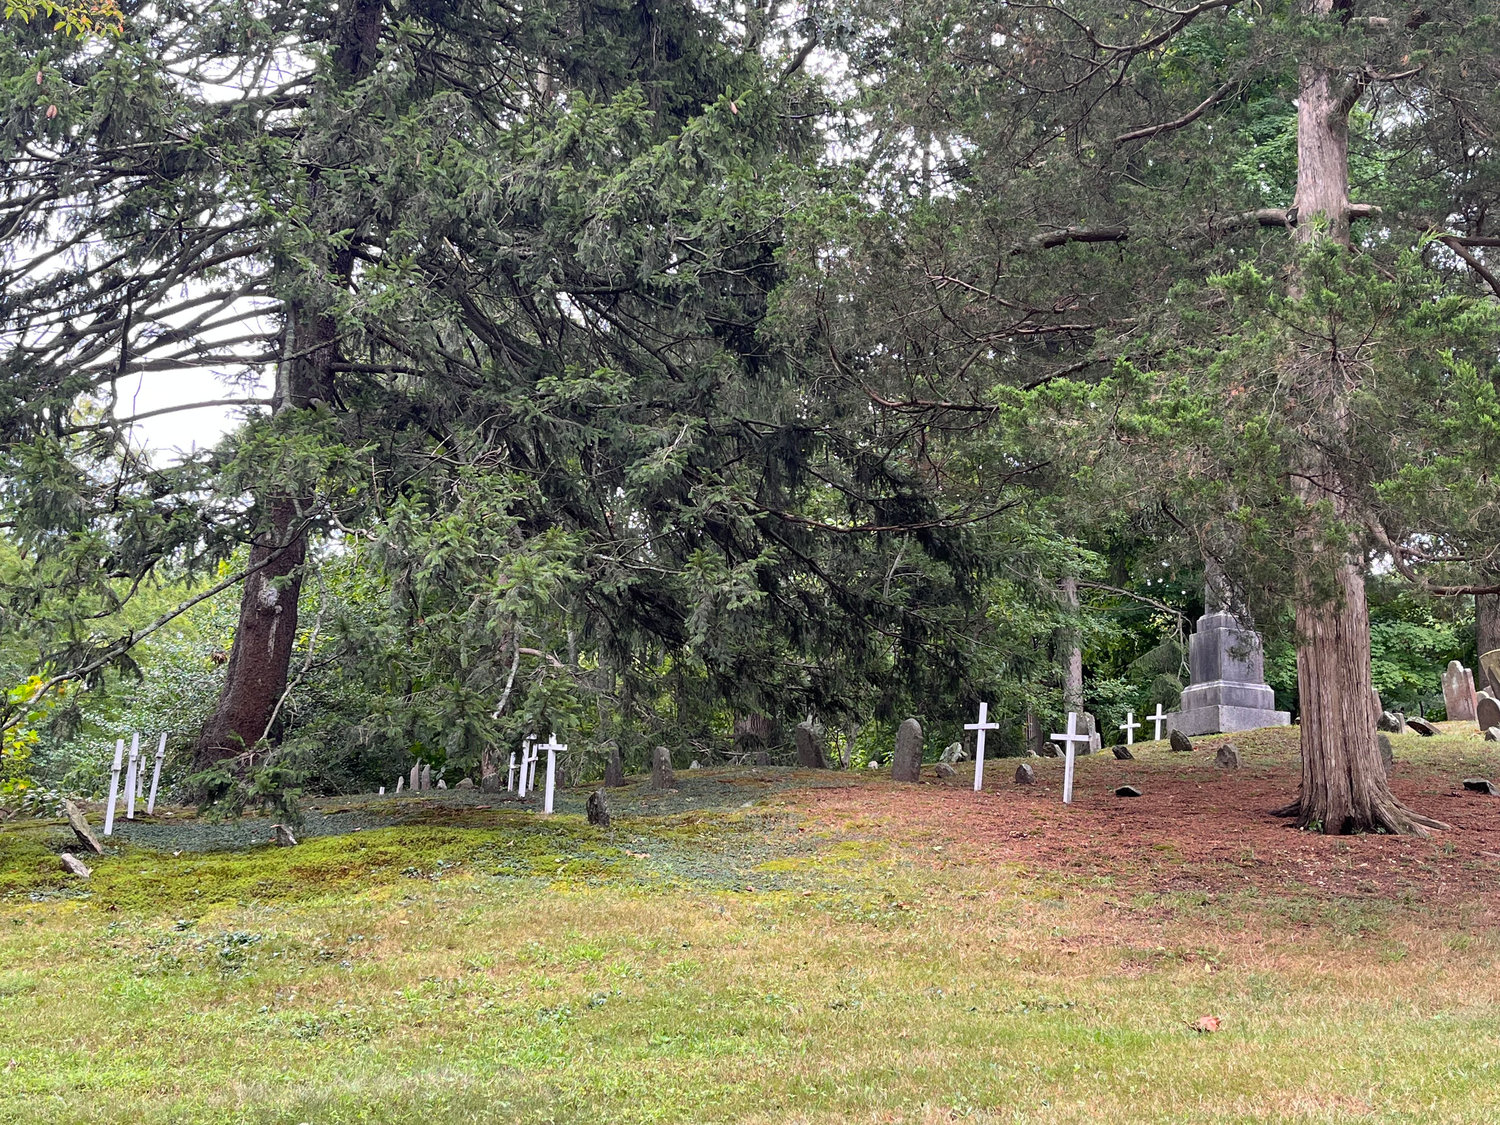 The white crosses scattered around the cemetery mark the likely locations of graves of indentured servants and slaves who served the Youngs family.